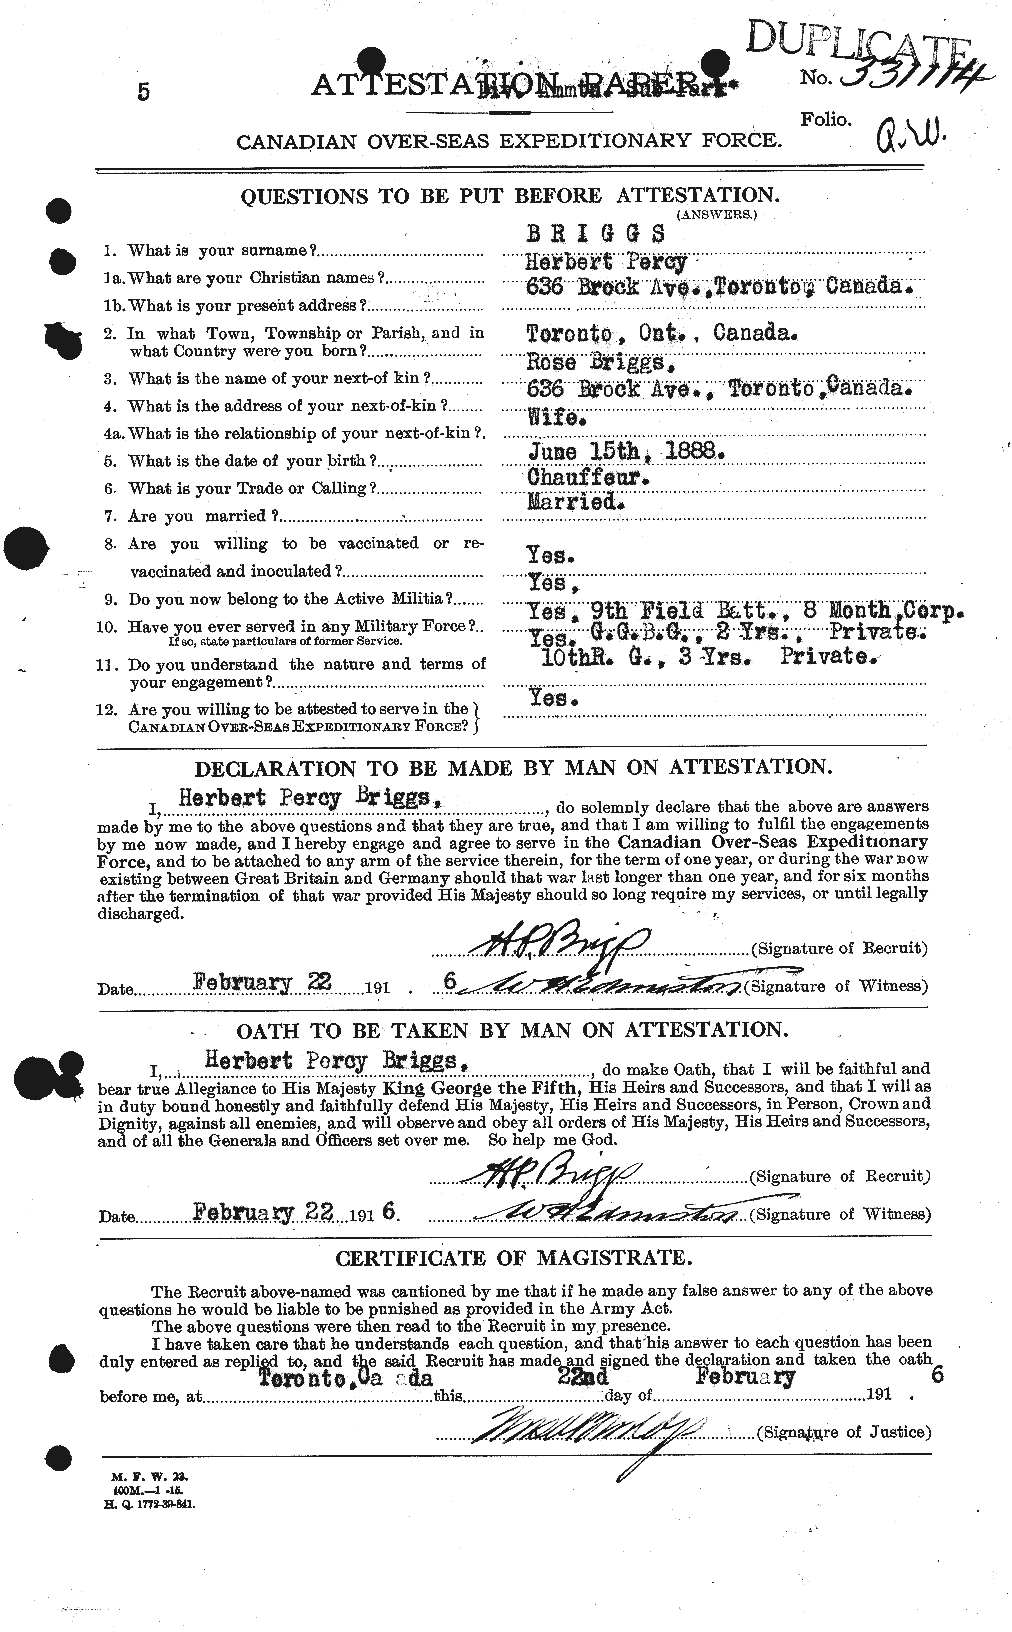 Personnel Records of the First World War - CEF 264033a